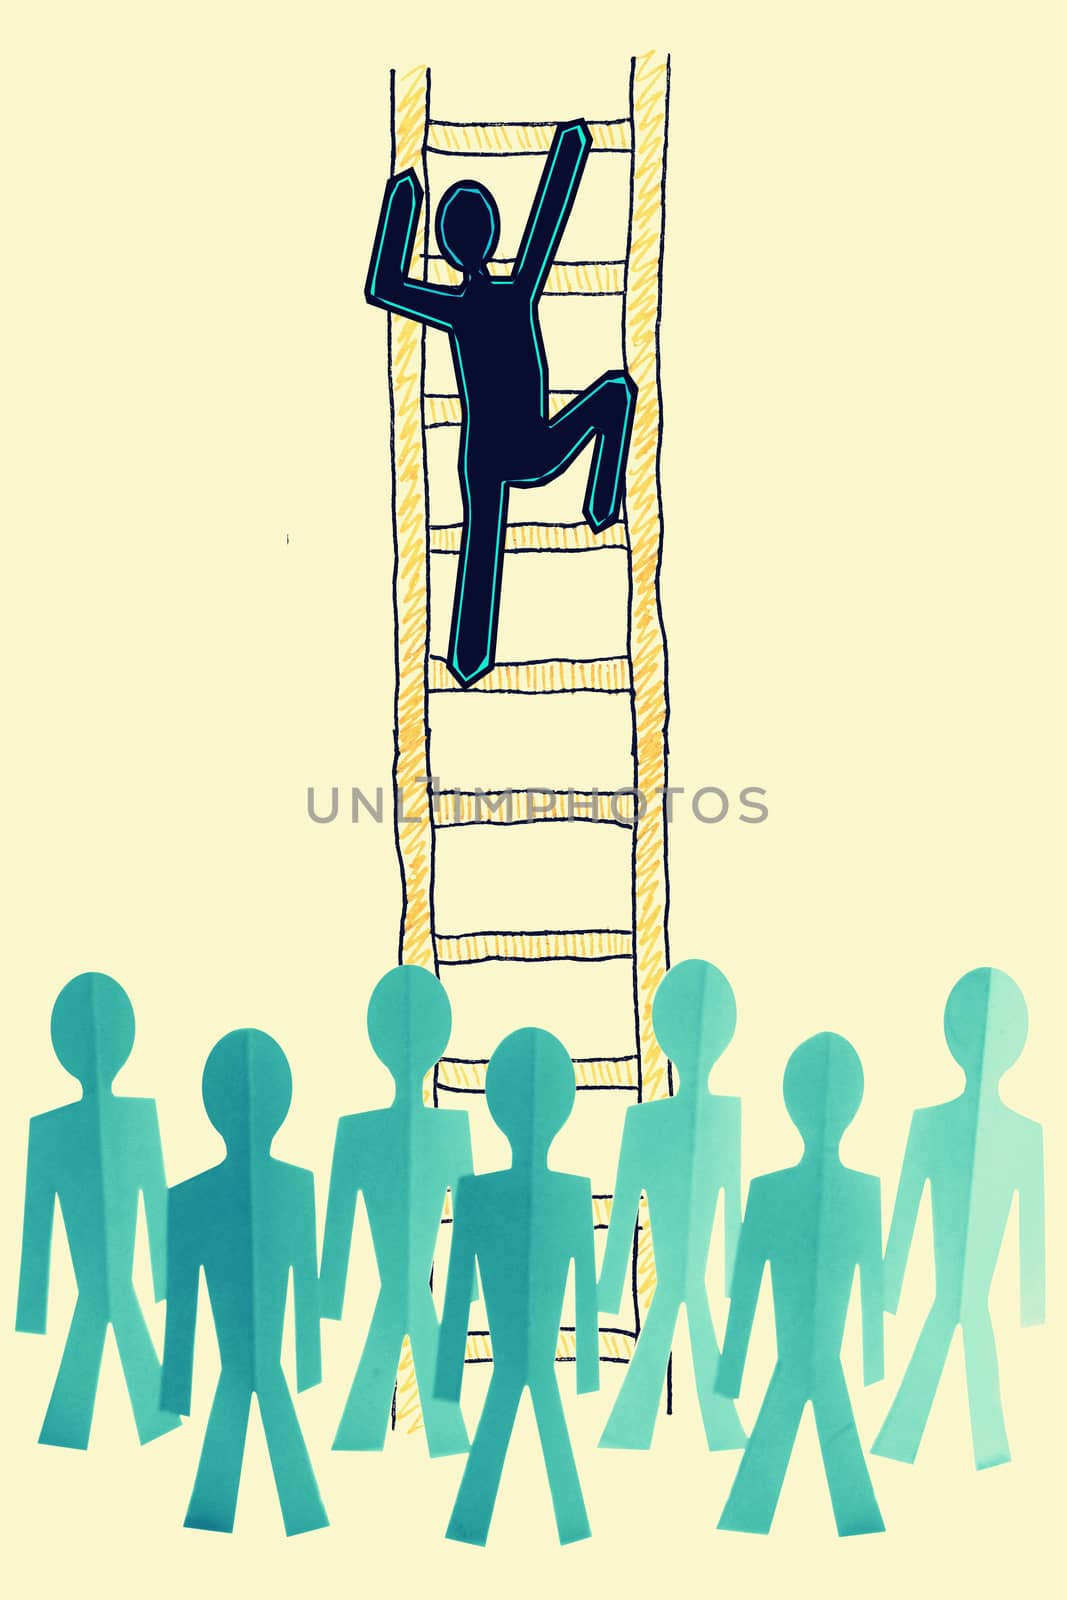 Paperman on Ladder, success ladder concept by yands